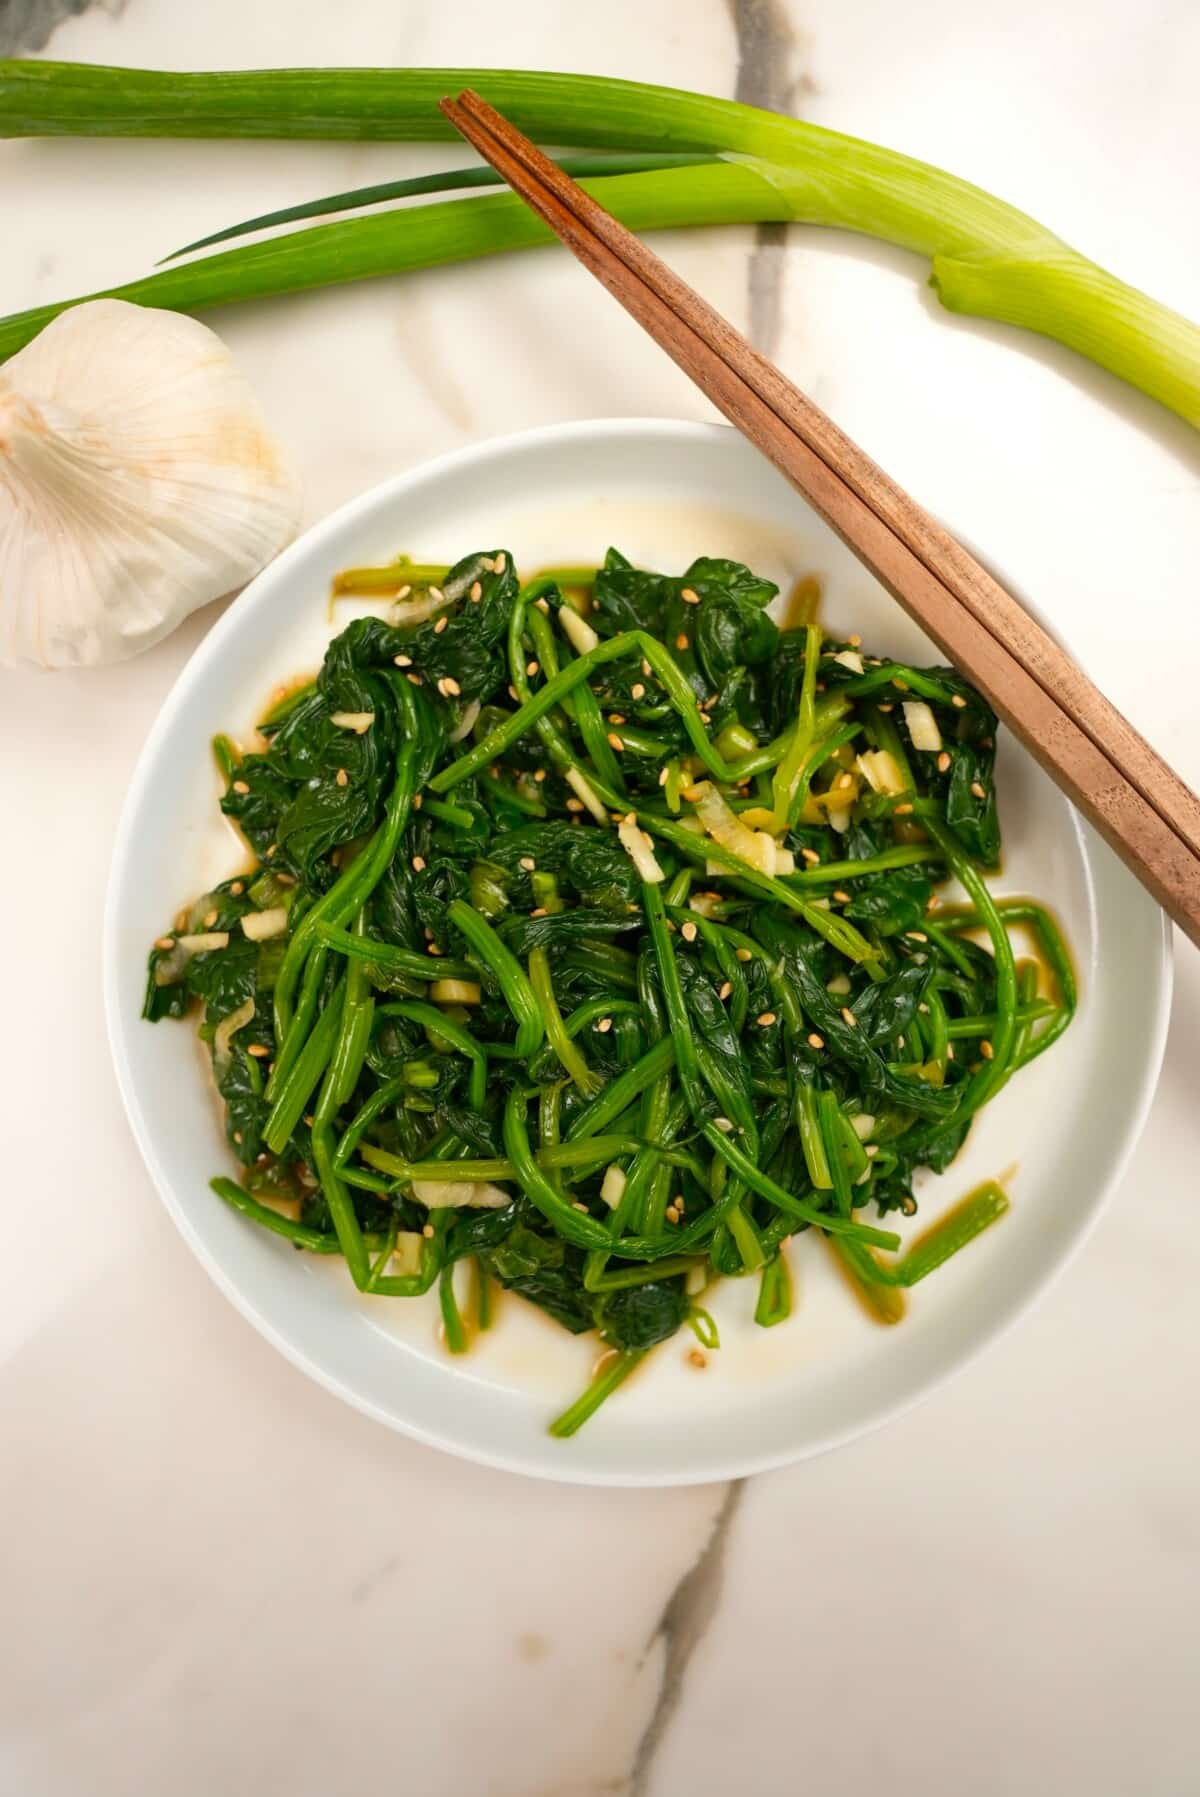 Korean spinach side dish marinated with garlic and soy sauce.